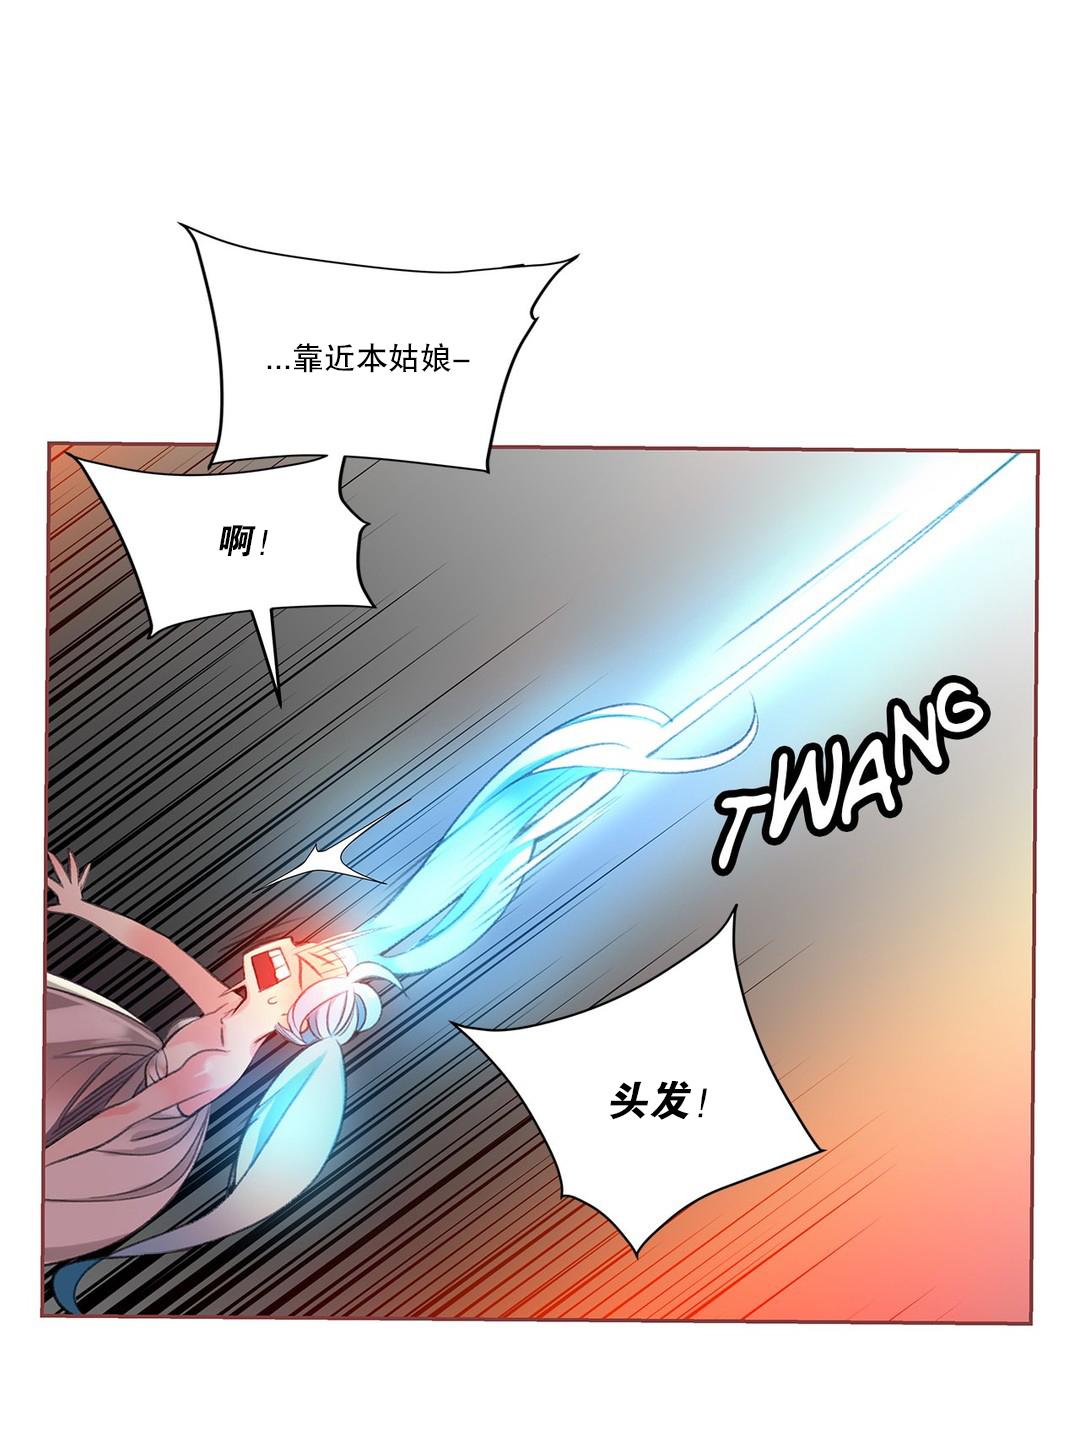 [Juder] Lilith`s Cord (第二季) Ch.61-64 [Chinese] [aaatwist个人汉化] [Ongoing] 9